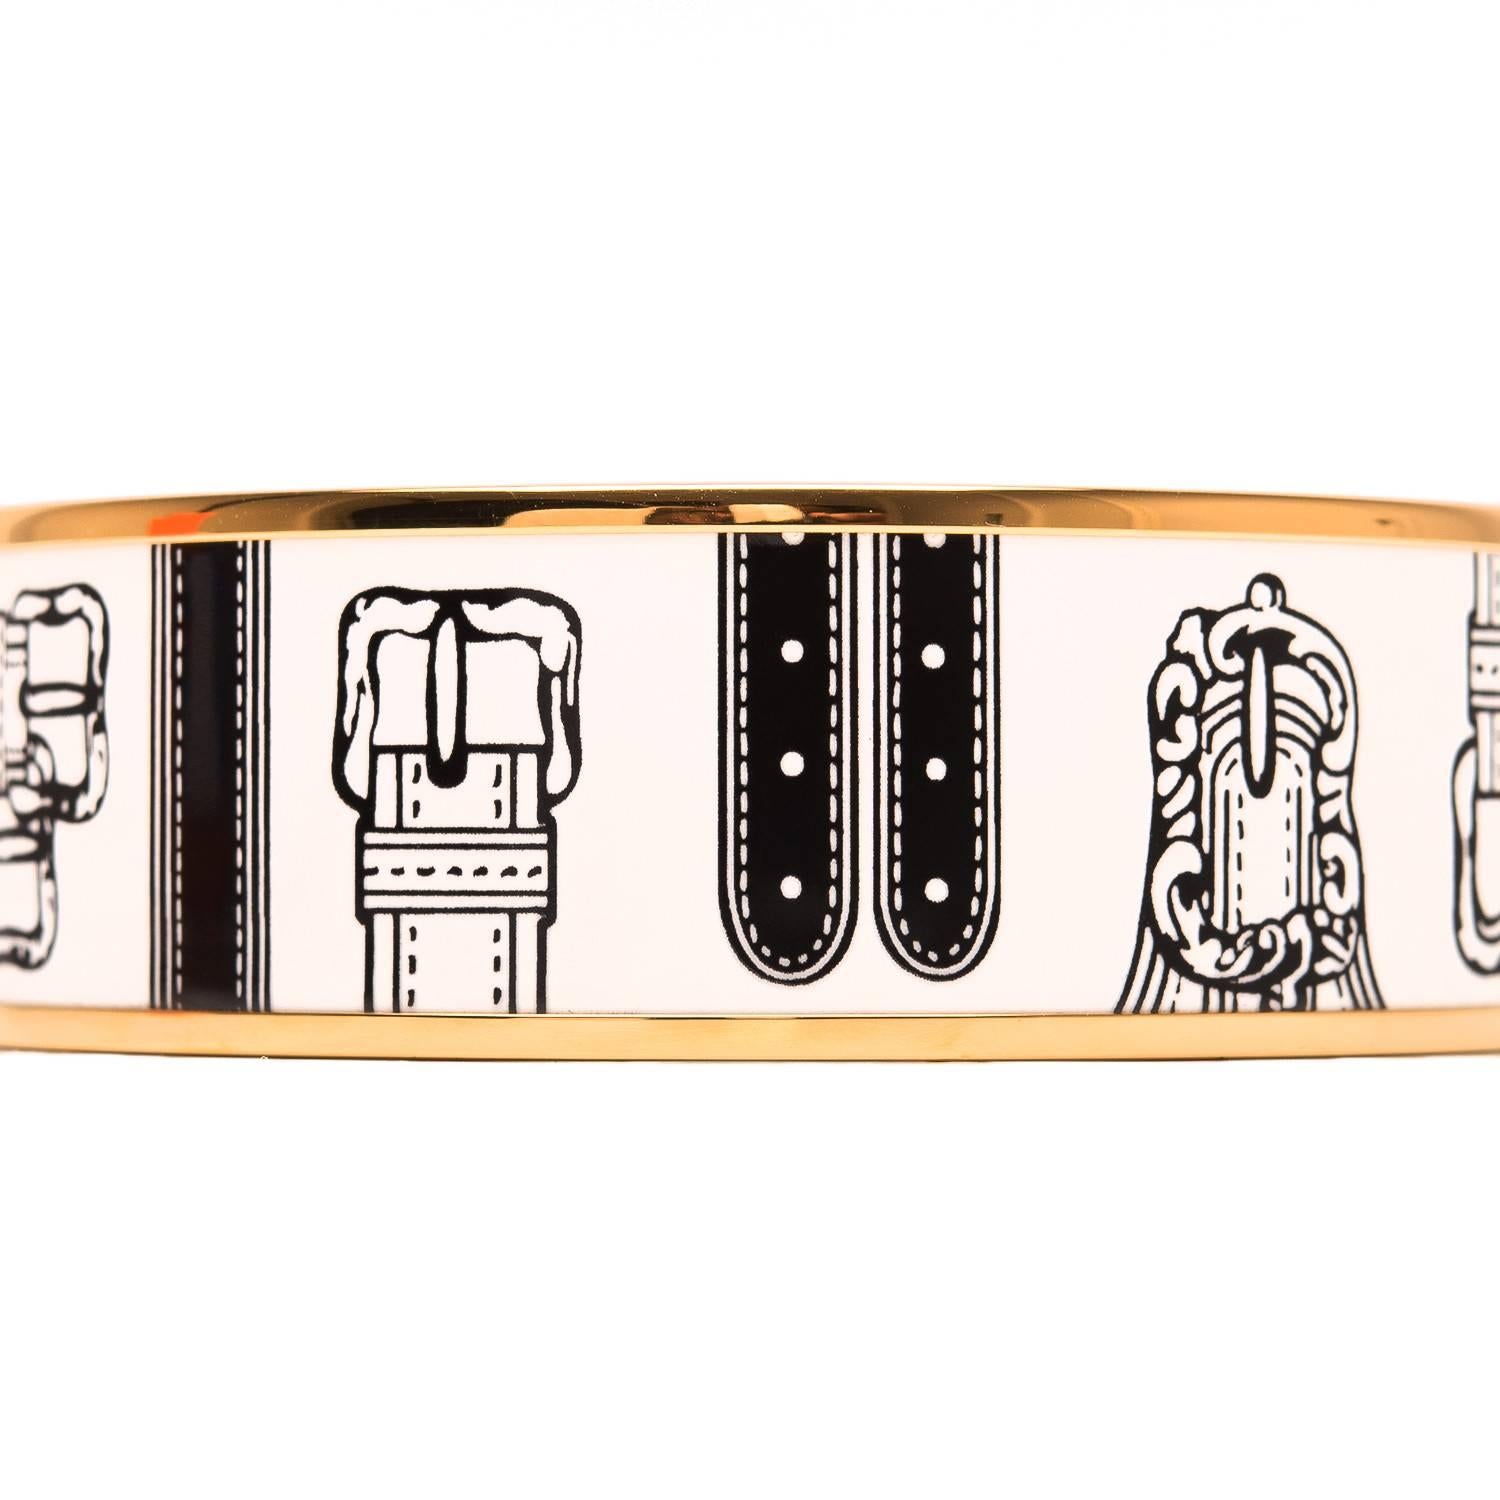 Hermes "Harnais Des Presidents" wide printed enamel bracelet size PM (65).

This bracelet depicts black harnesses on a white colored background with gold metal hardware.

Origin: France

Condition: Pristine, never worn

Accompanied